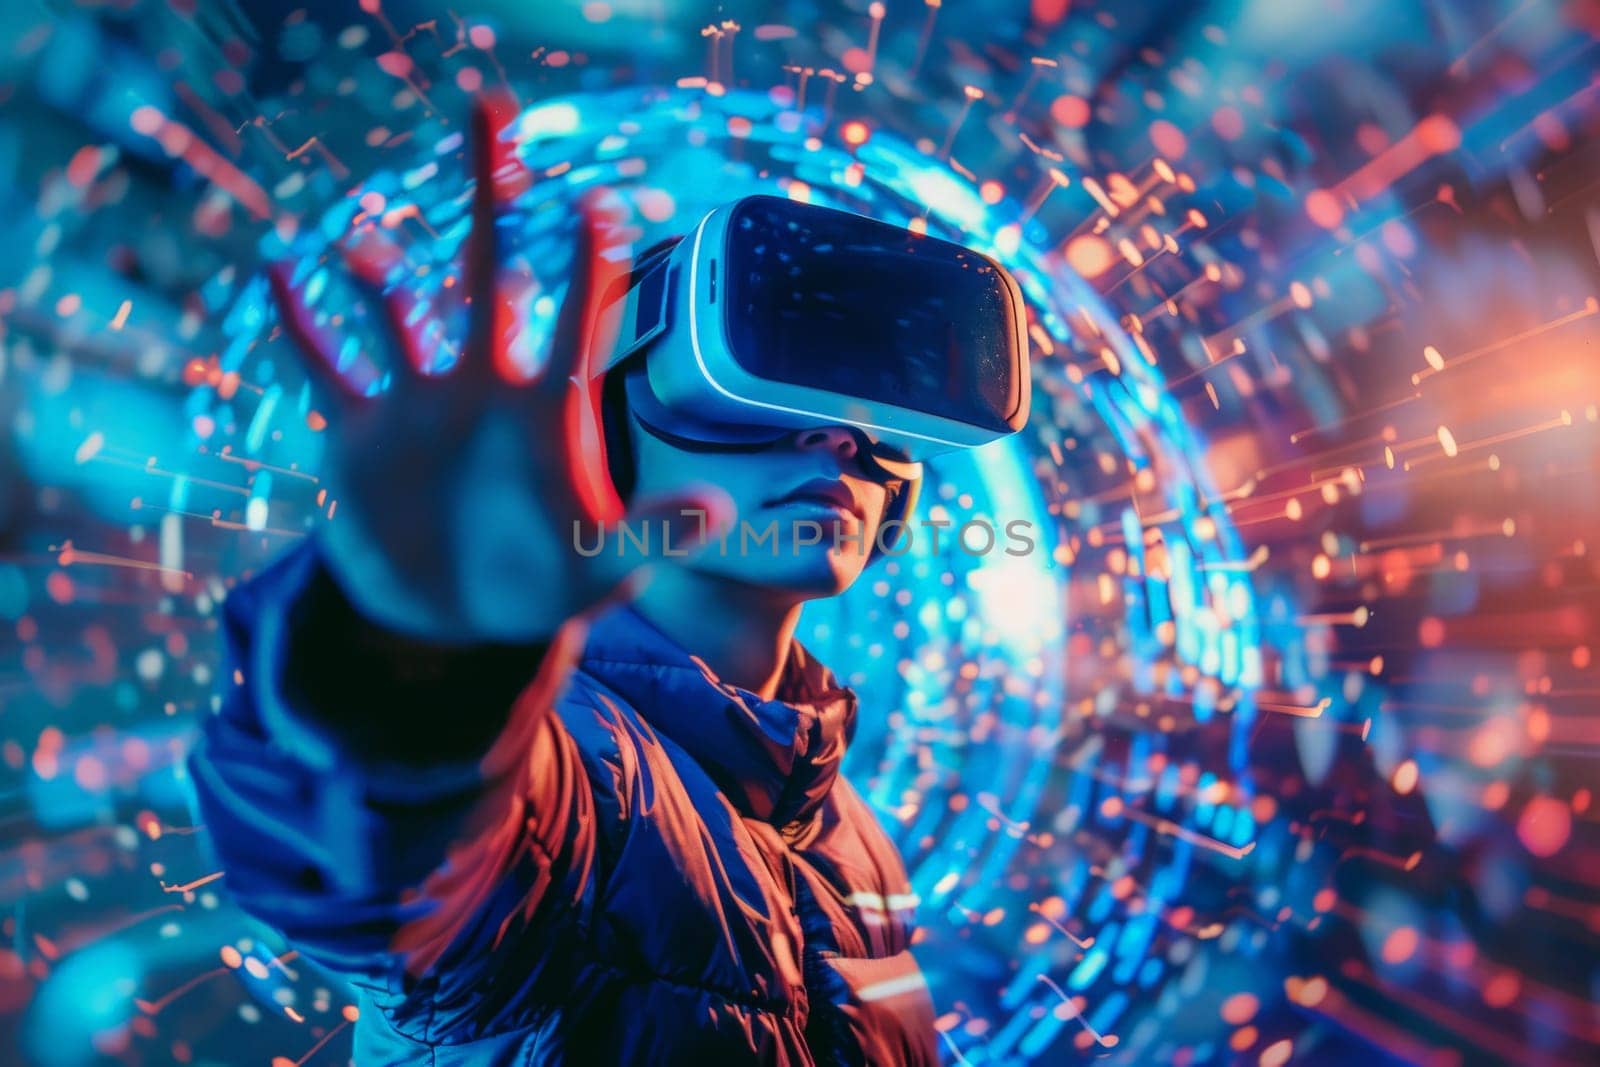 A person wearing a virtual reality headset is reaching out to touch a colorful, swirling background. Concept of excitement and wonder as the person explores the virtual world